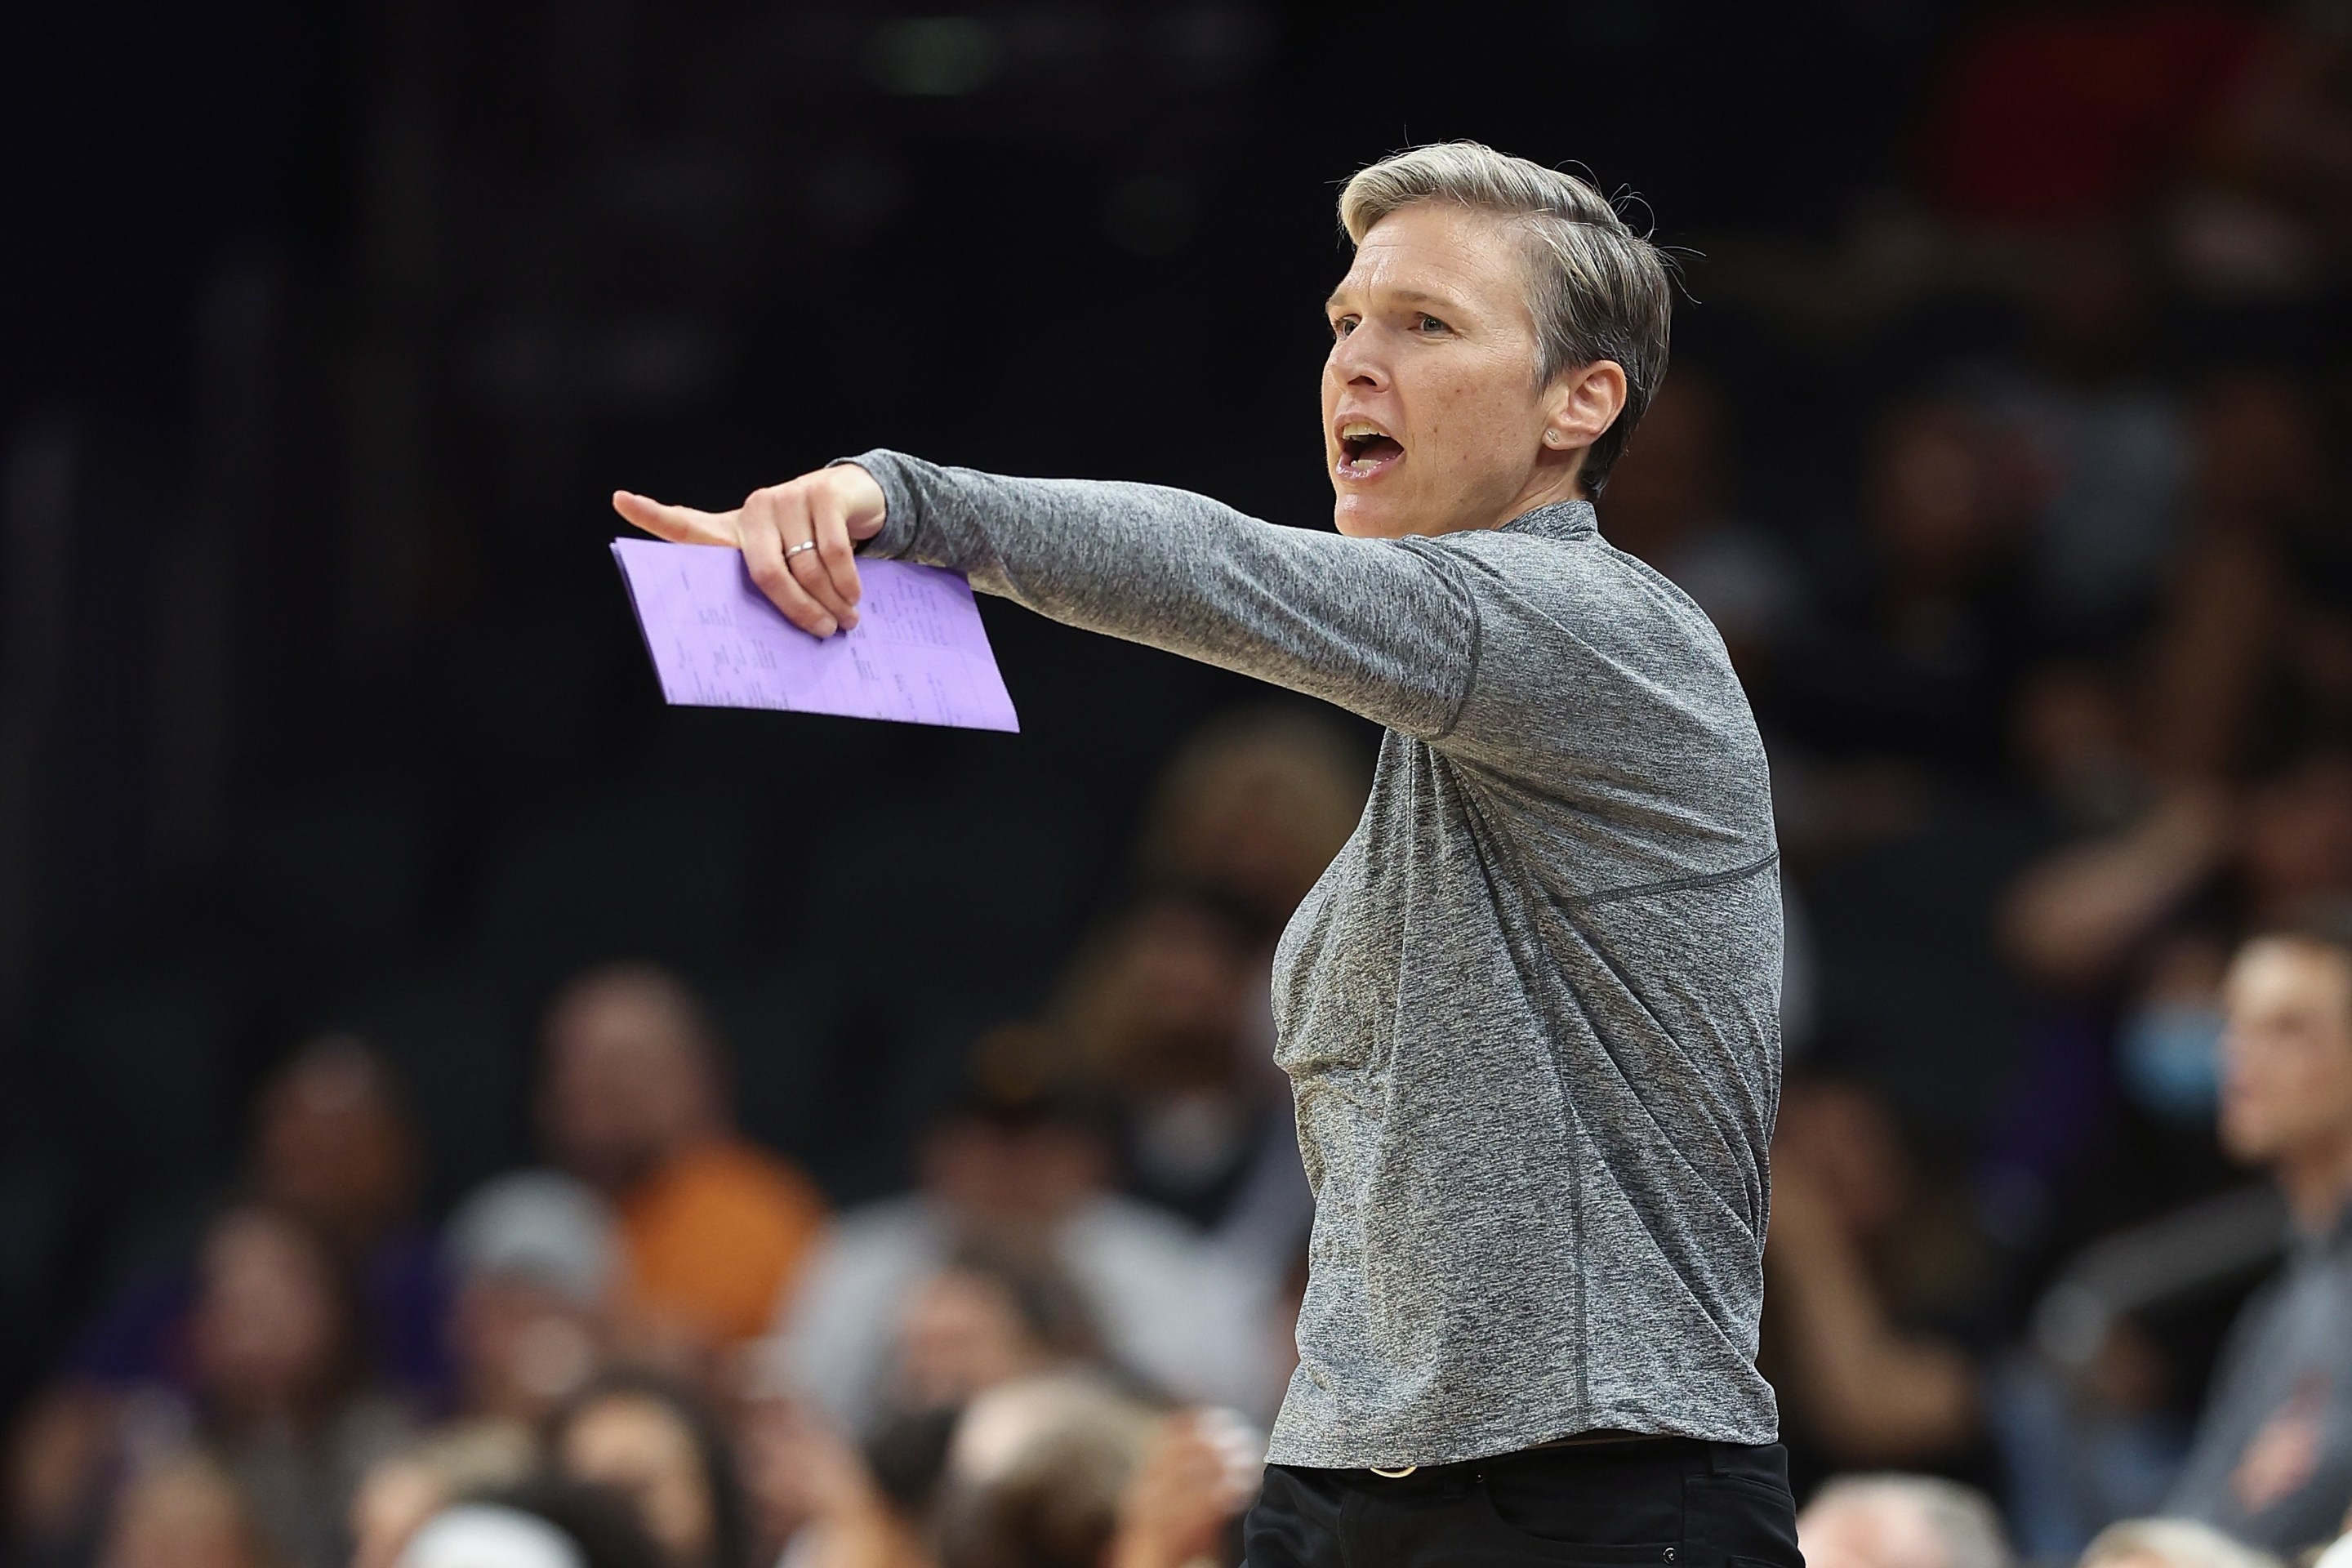 Head coach Vanessa Nygaard of the Phoenix Mercury reacts during the second half of the WNBA game at Footprint Center on June 27, 2022 in Phoenix, Arizona. The Mercury defeated the Fever 83-71.